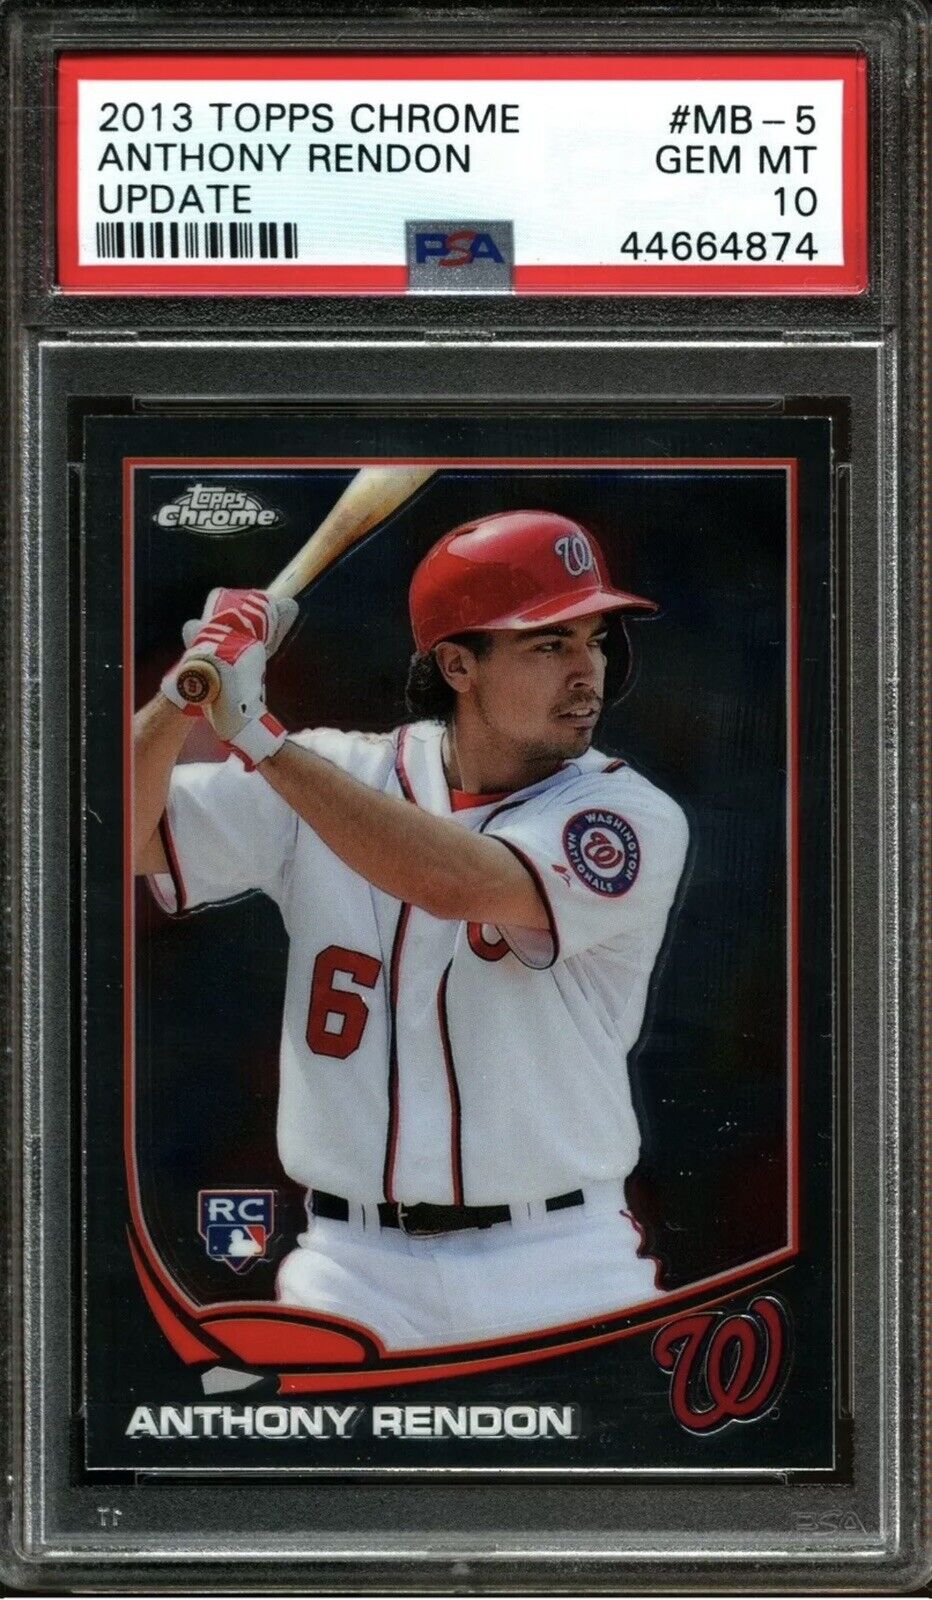 2013 TOPPS CHROME UPDATE #MB-5 ANTHONY RENDON RC PSA 10